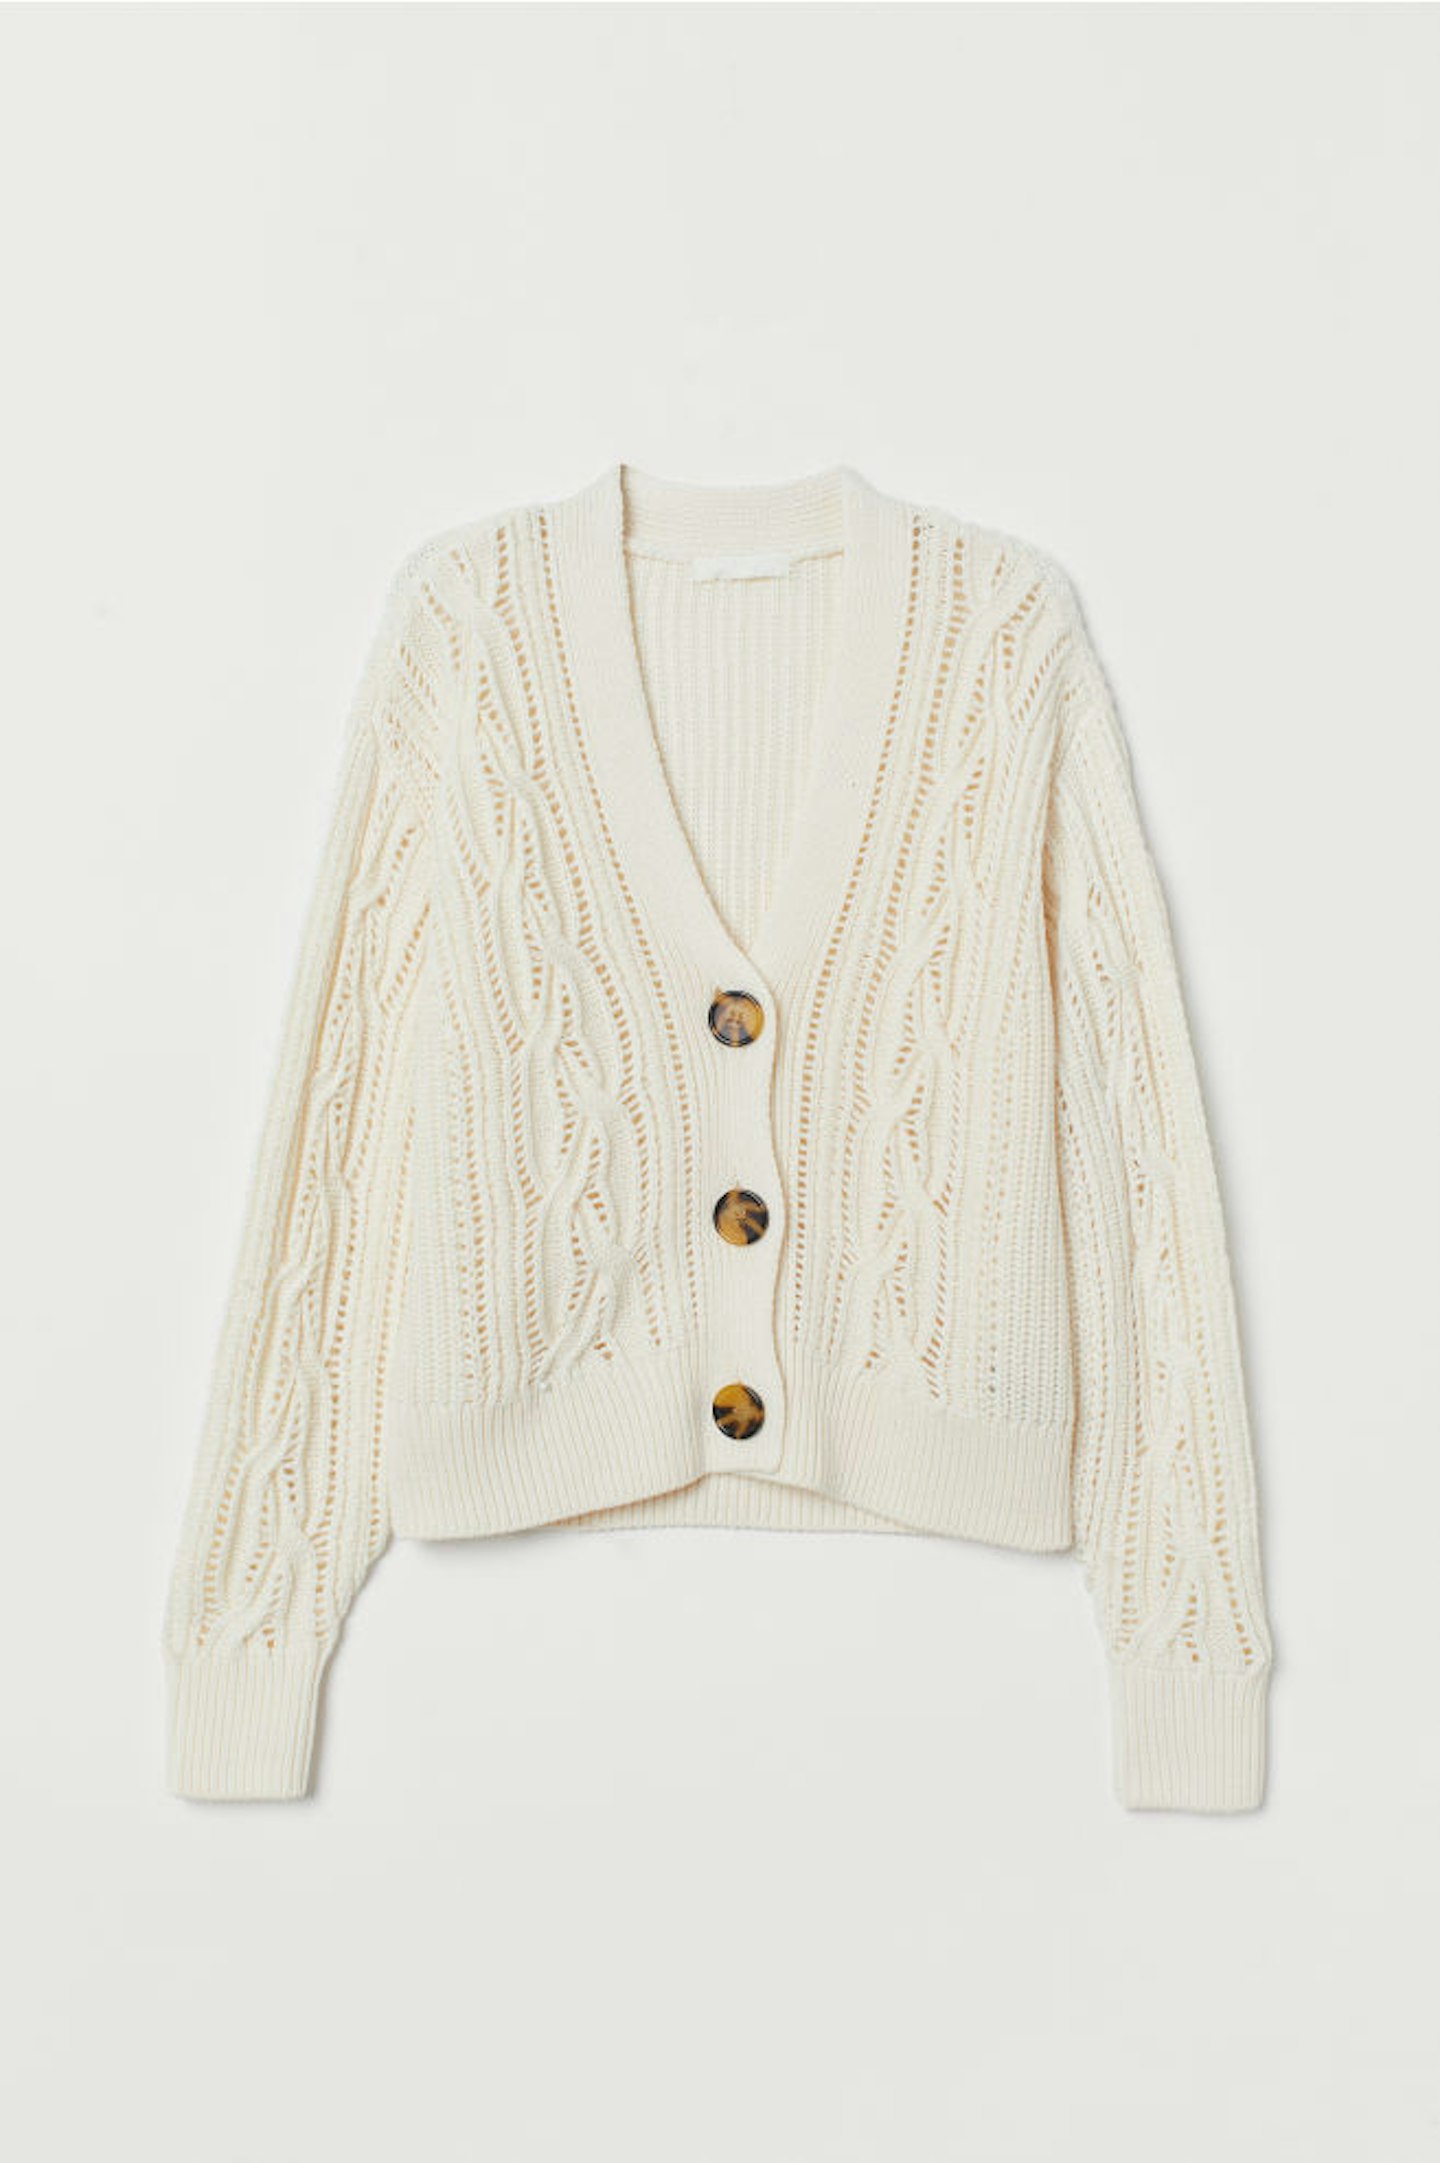 H&M, Cable-Knit Cardigan, £24.99